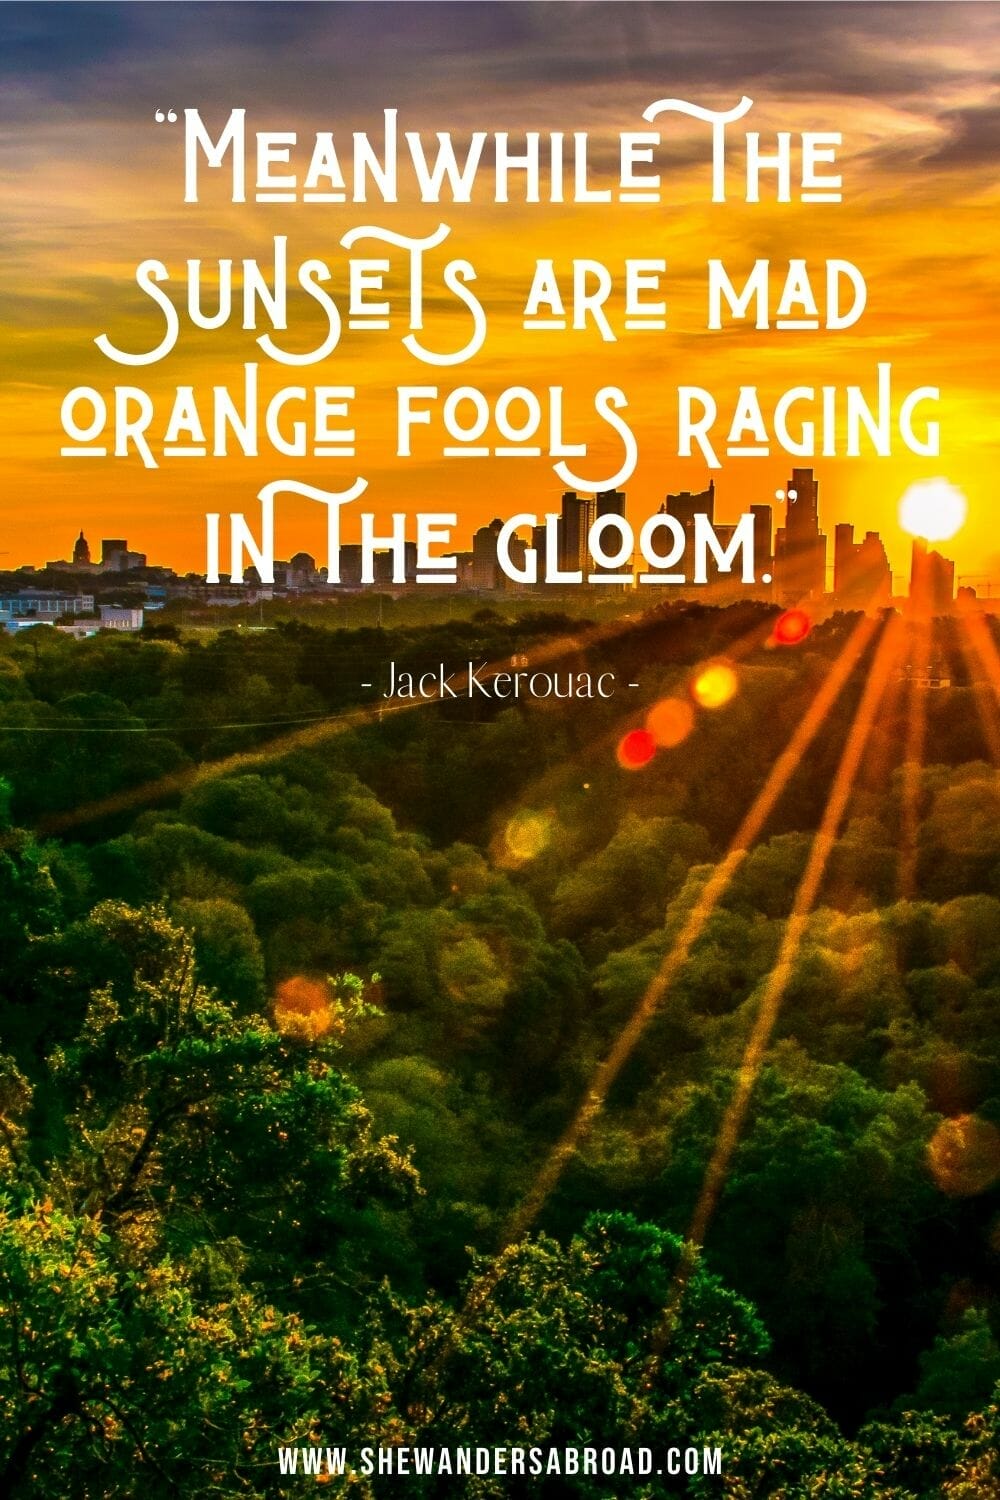 Peaceful sunset quotes